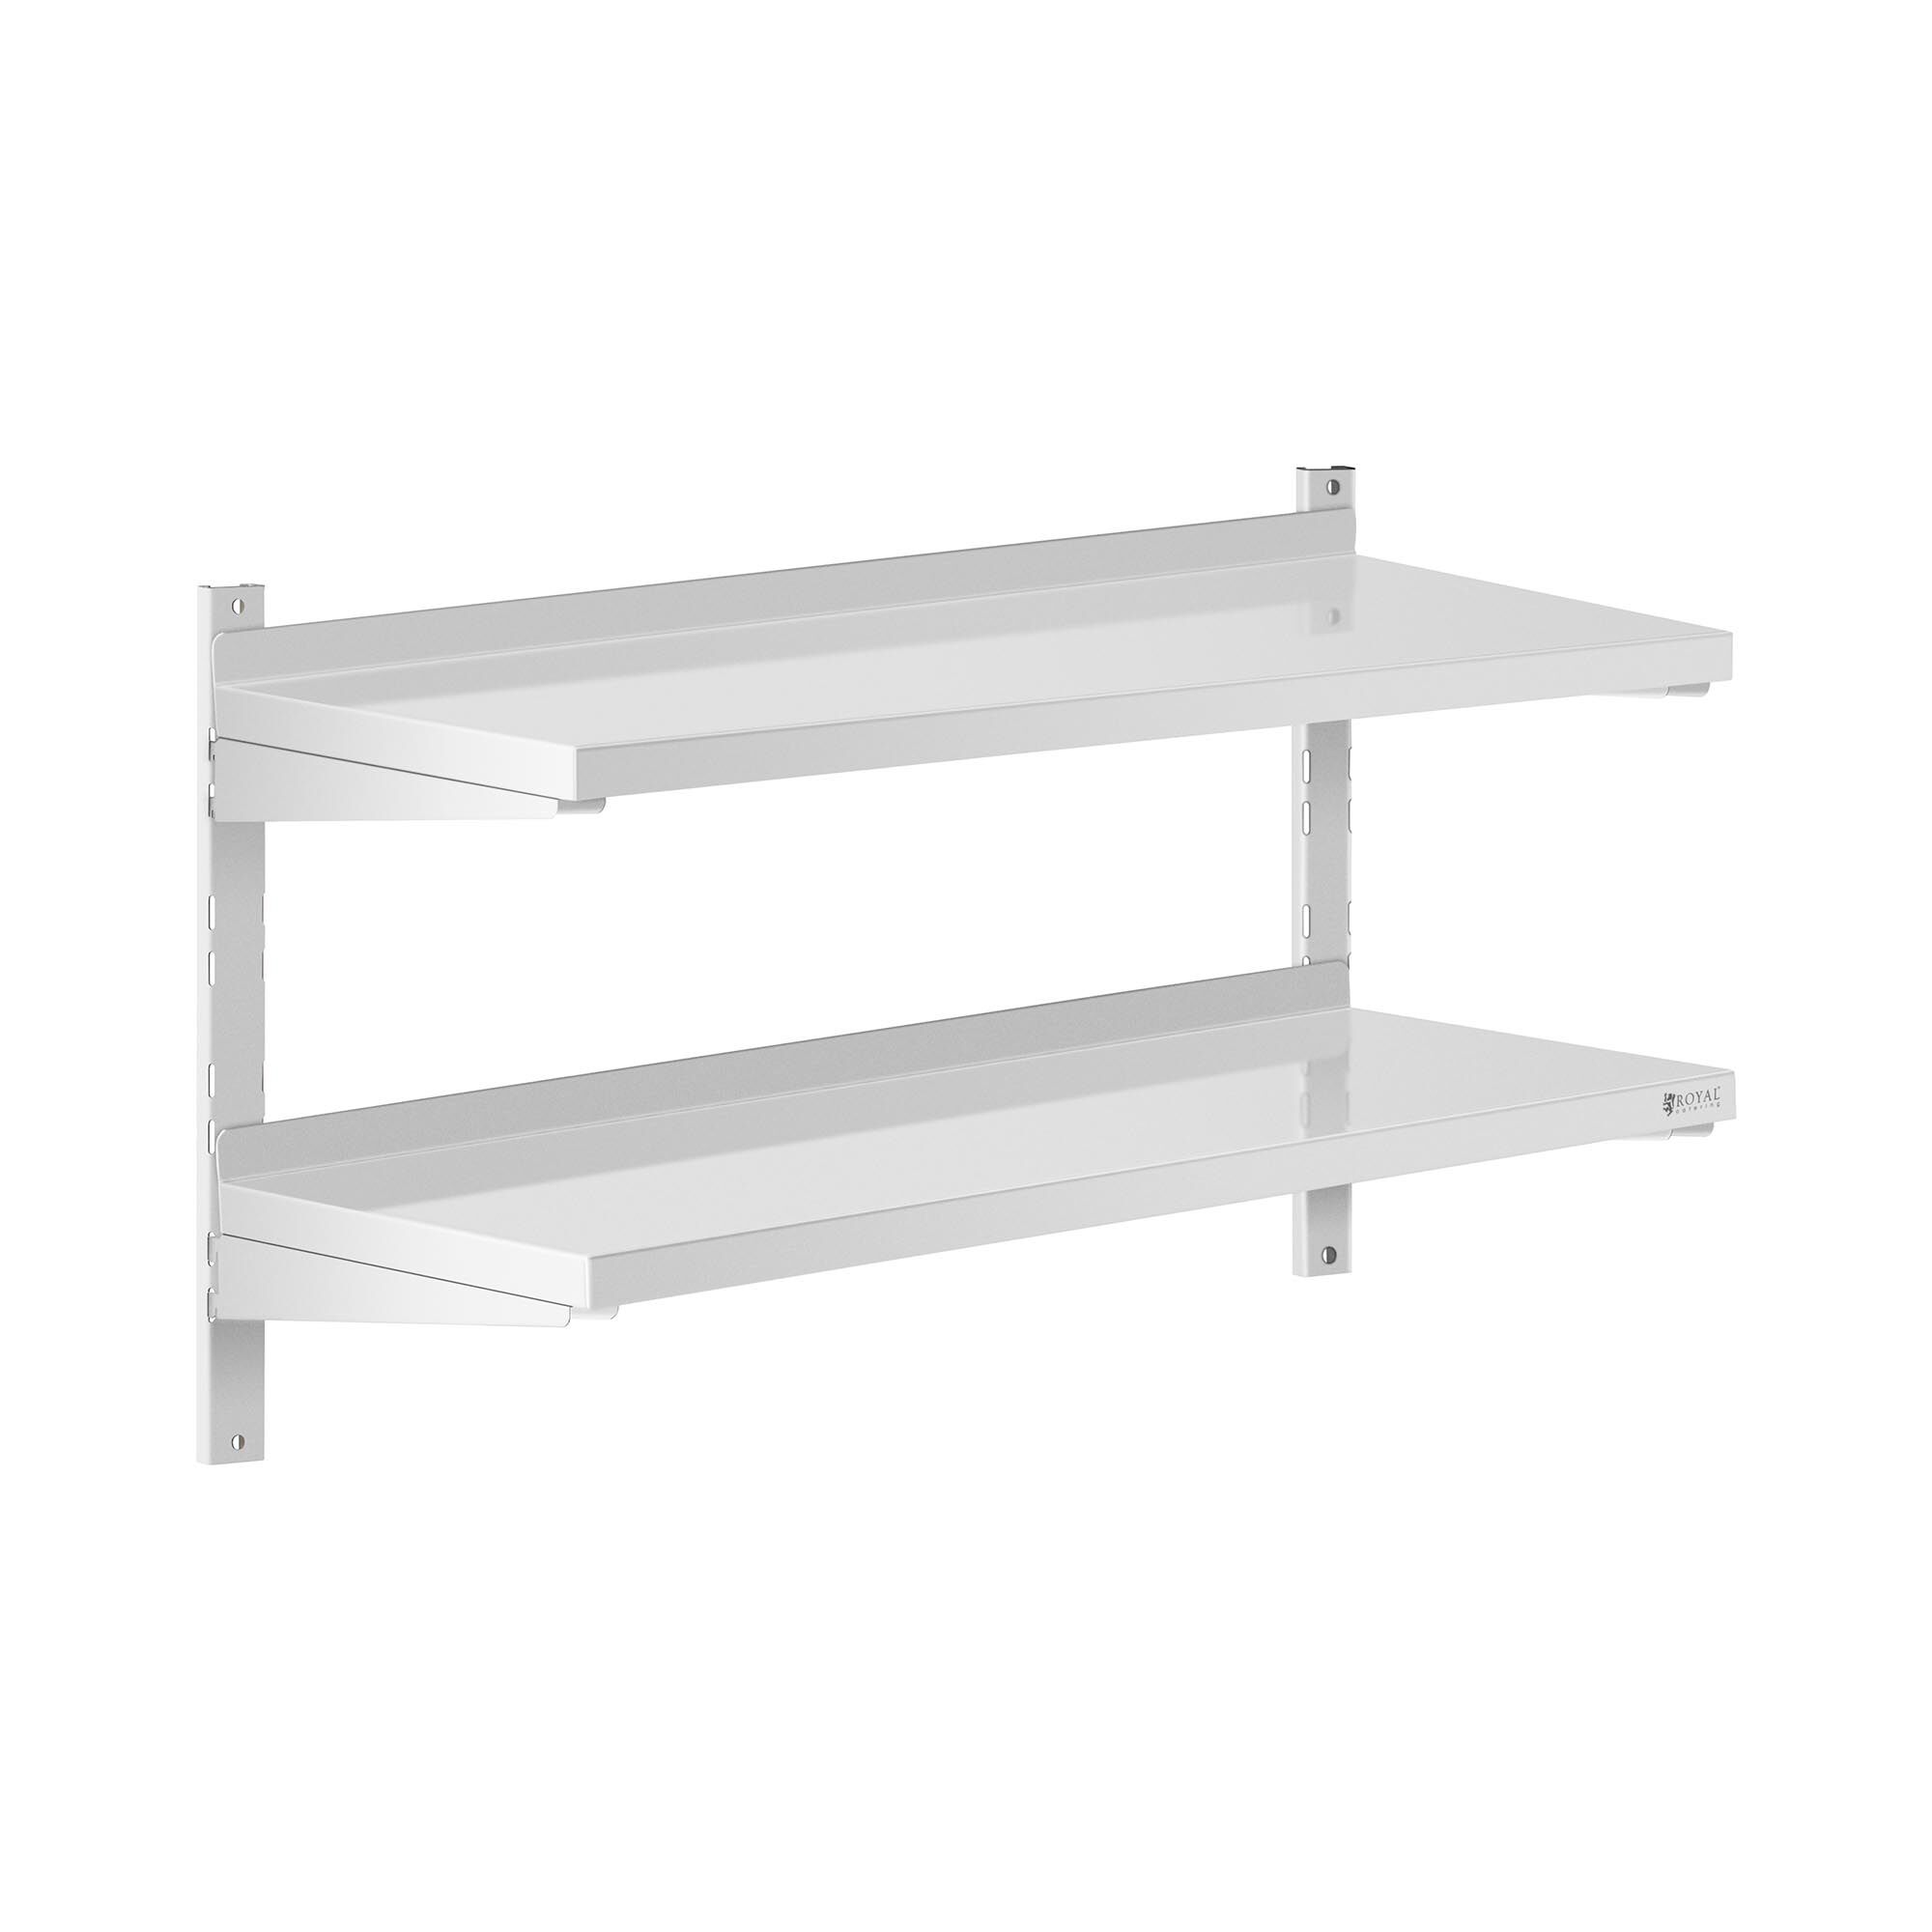 Royal Catering Stainless Steel Wall Shelf - 2 shelves - 40 x 100 cm